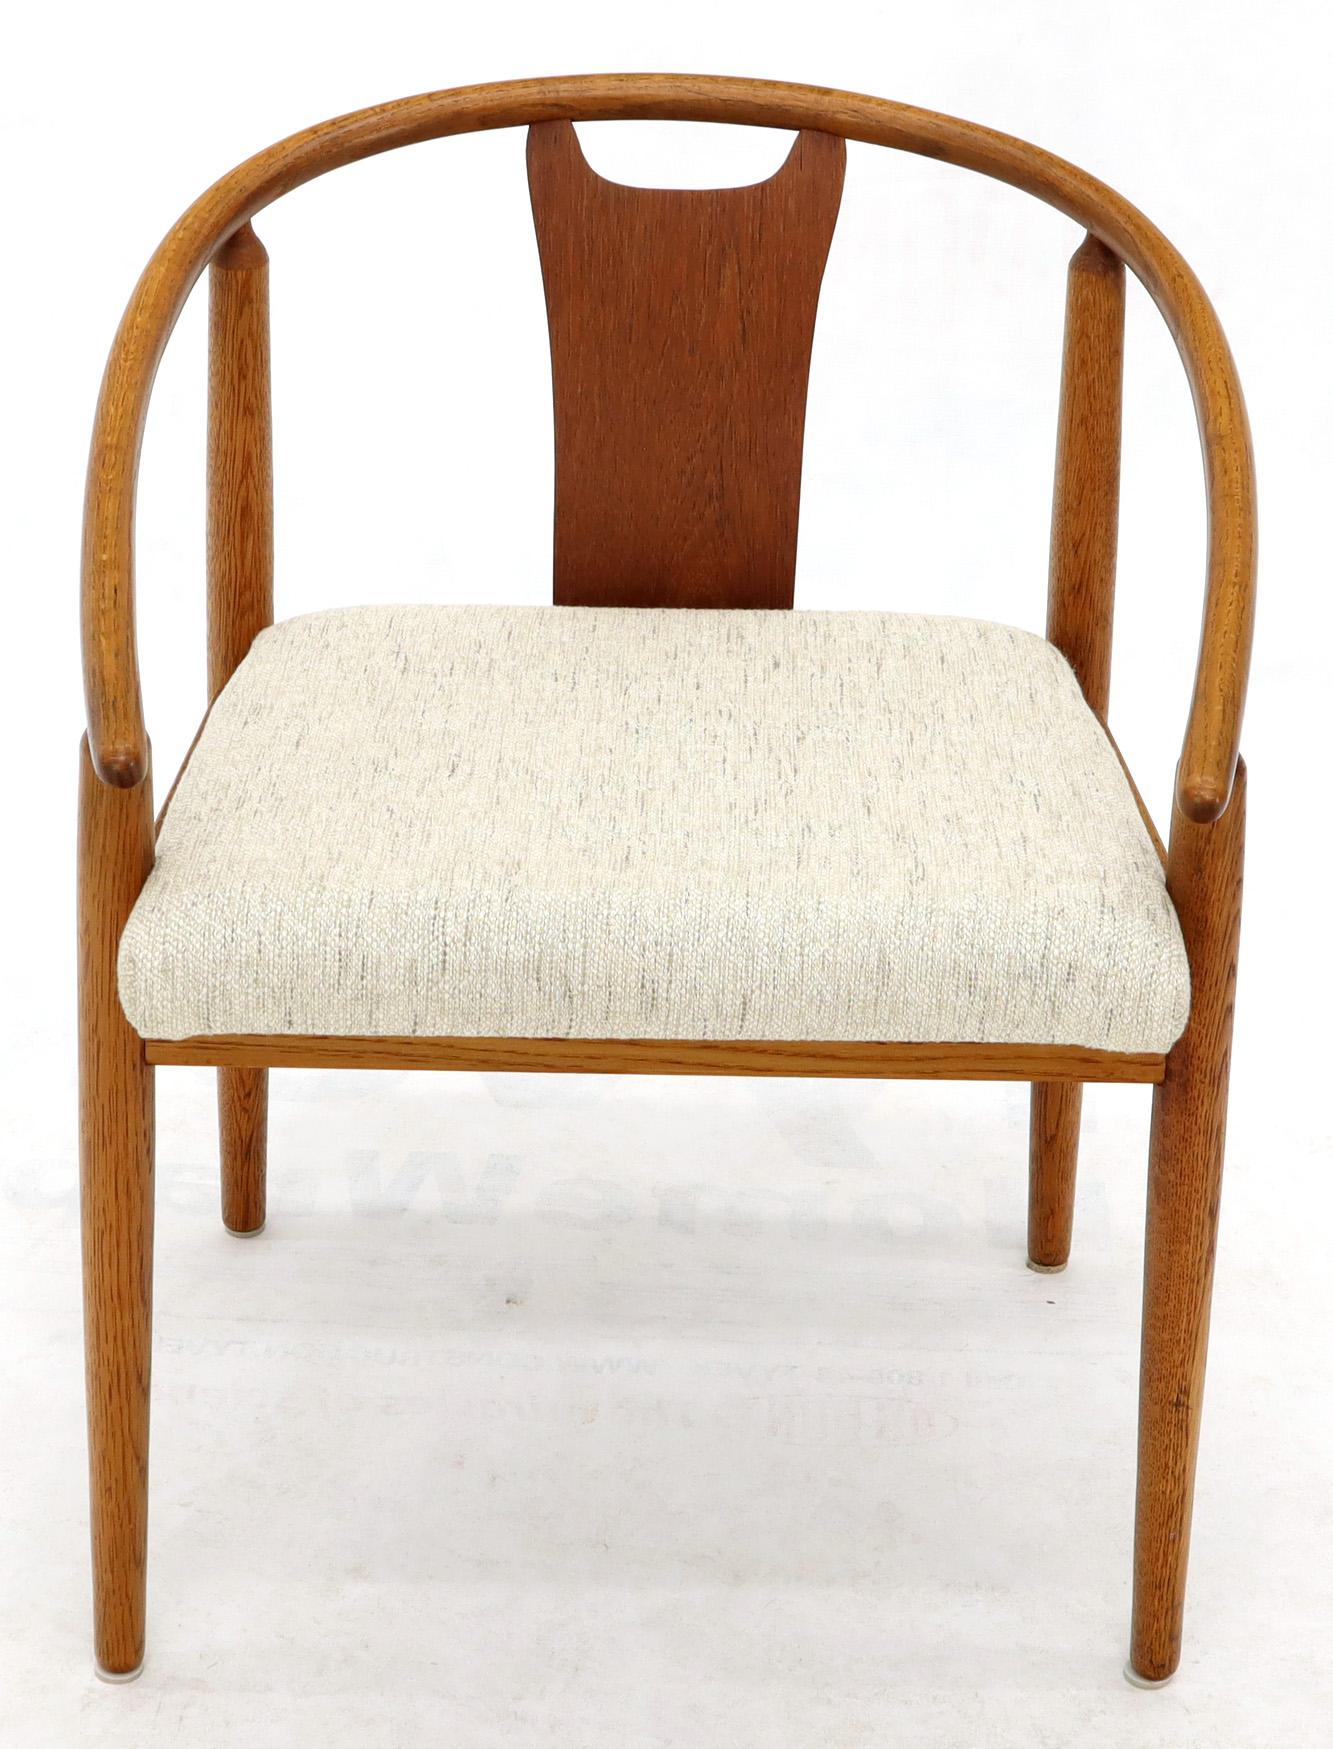 Set of 4 Barrel Back Bent Wood Dining Lounge Chairs New Upholstery In Good Condition For Sale In Rockaway, NJ